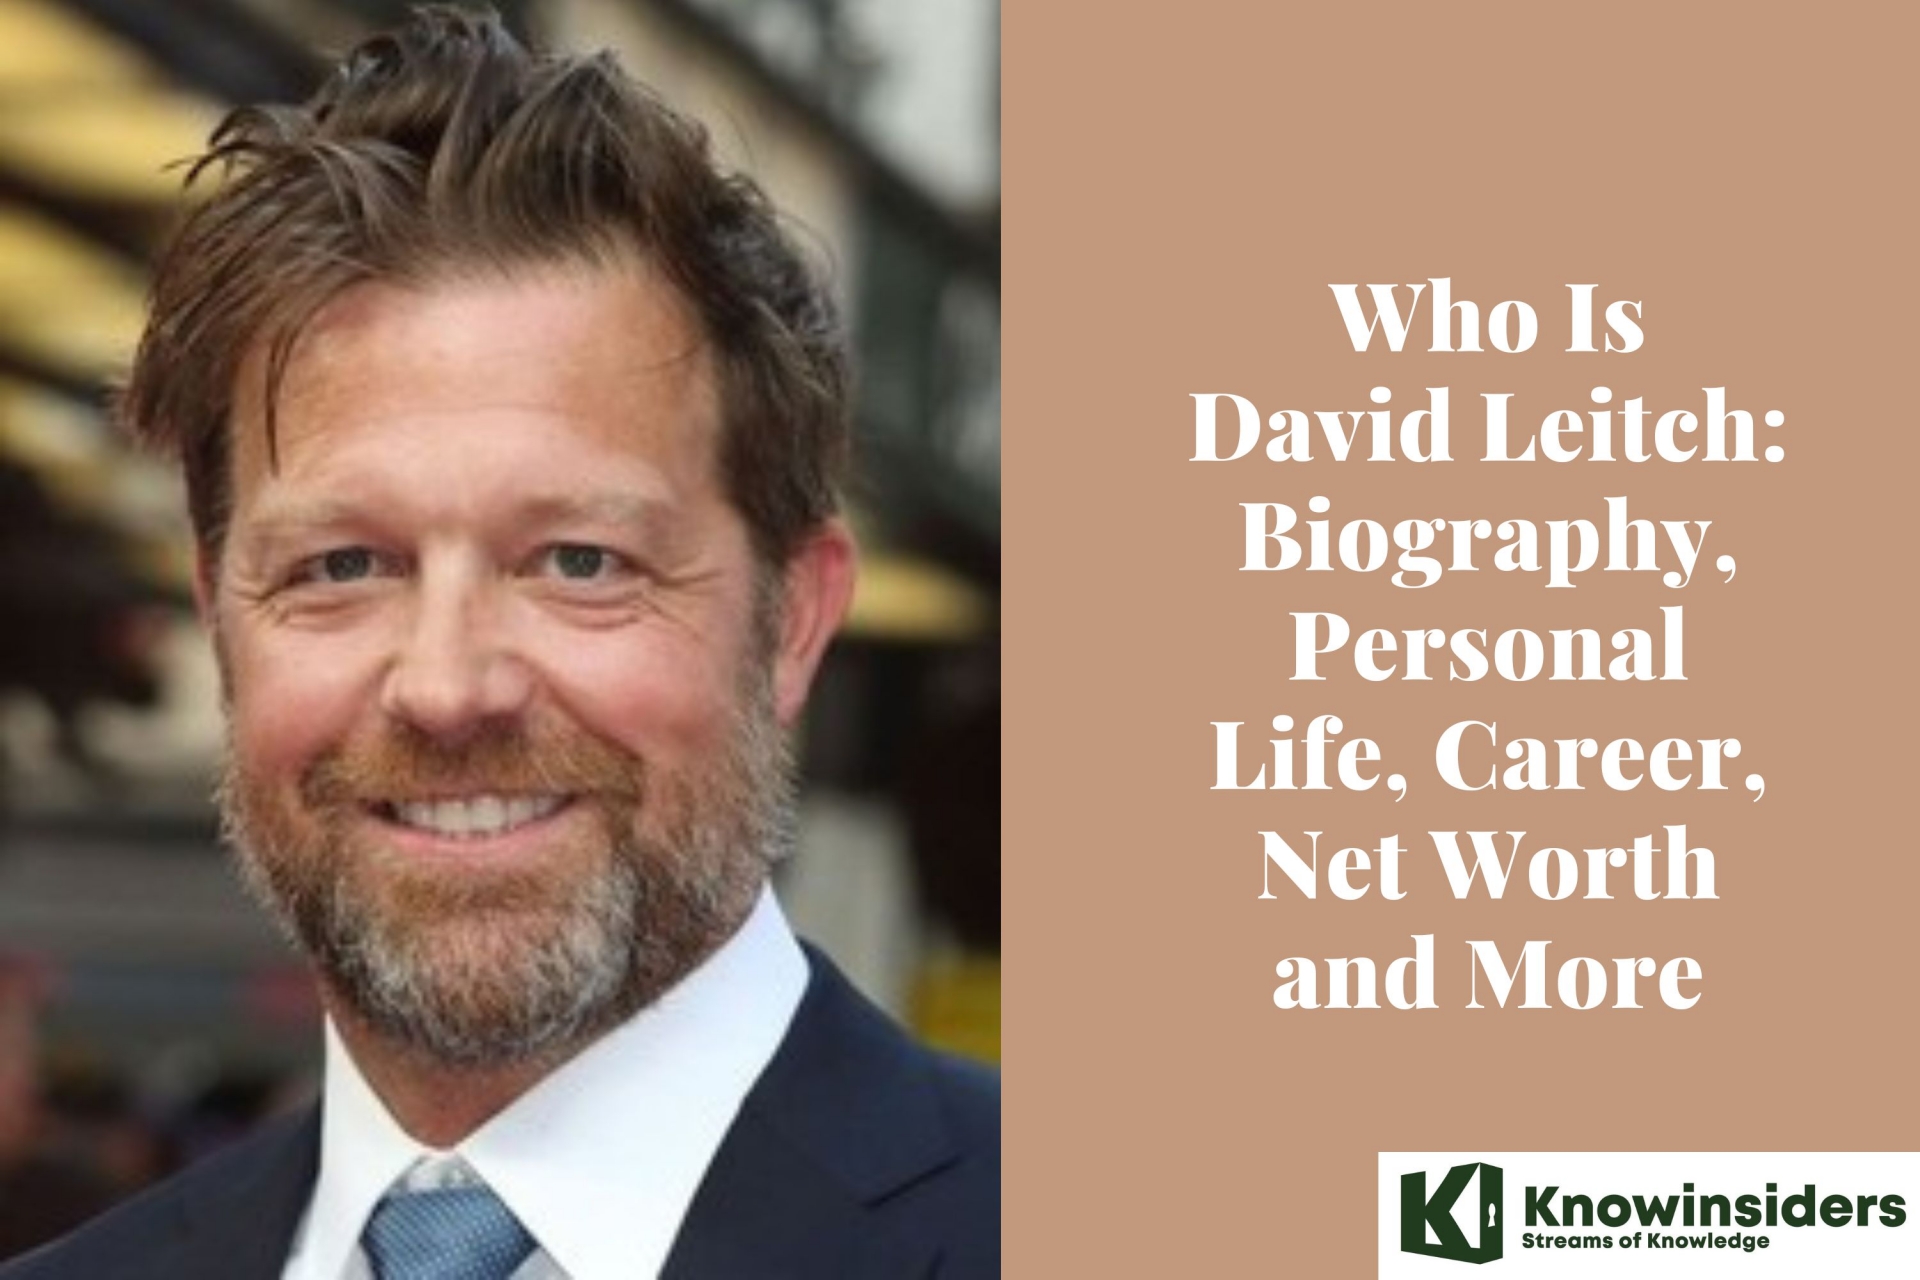 Who Is David Leitch: Biography, Personal Life, Career, Net Worth and More